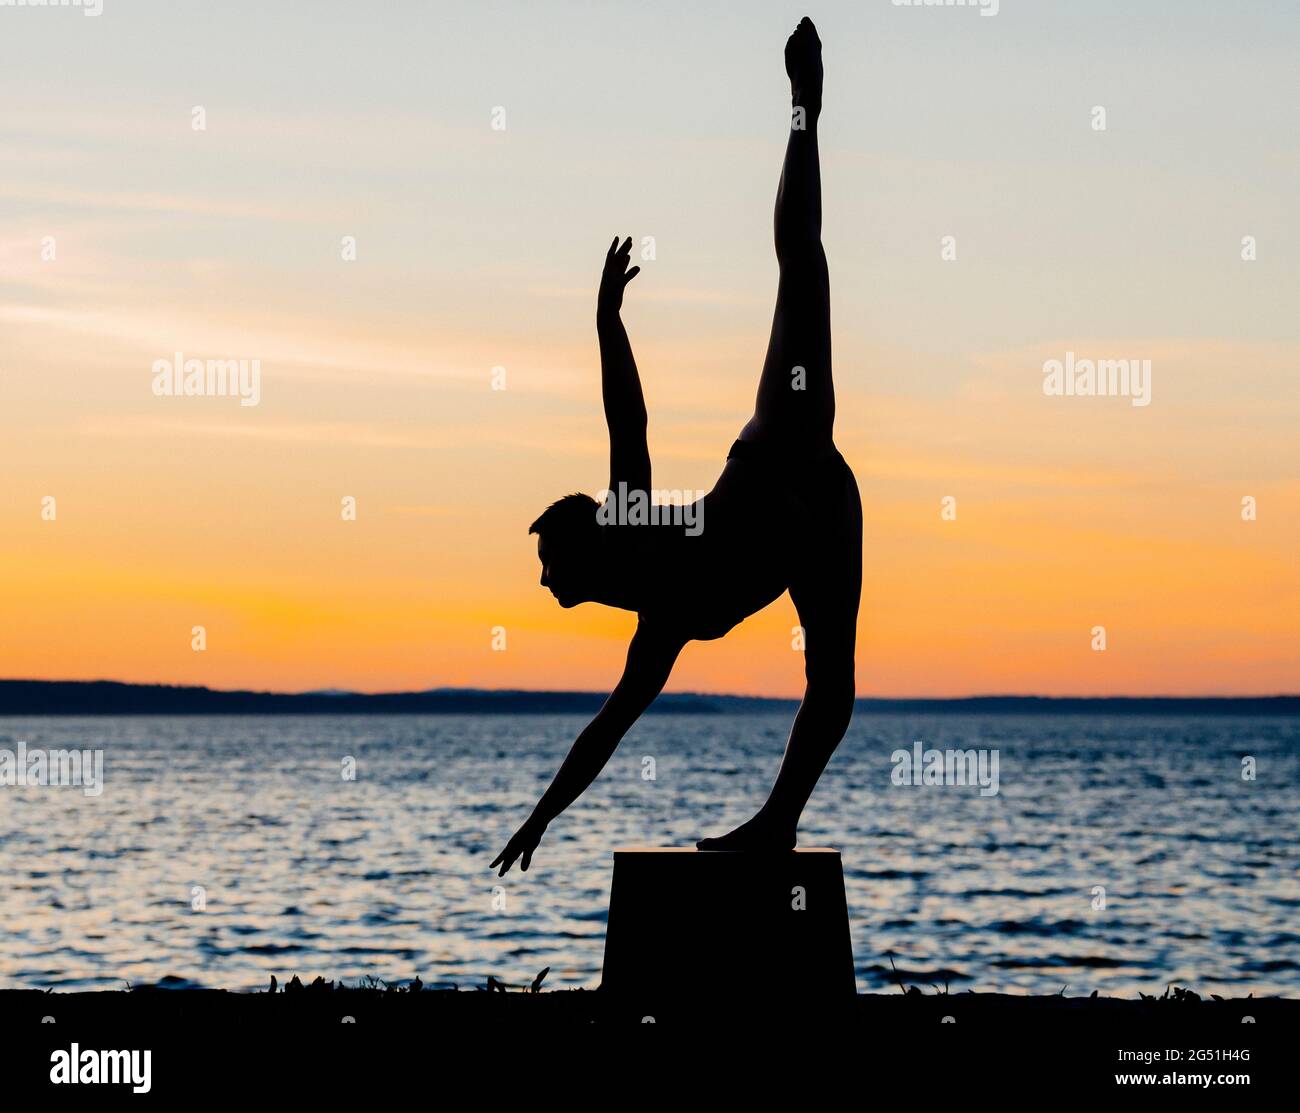 Silhouette of woman doing acrobatic pose against sea at sunset Stock Photo